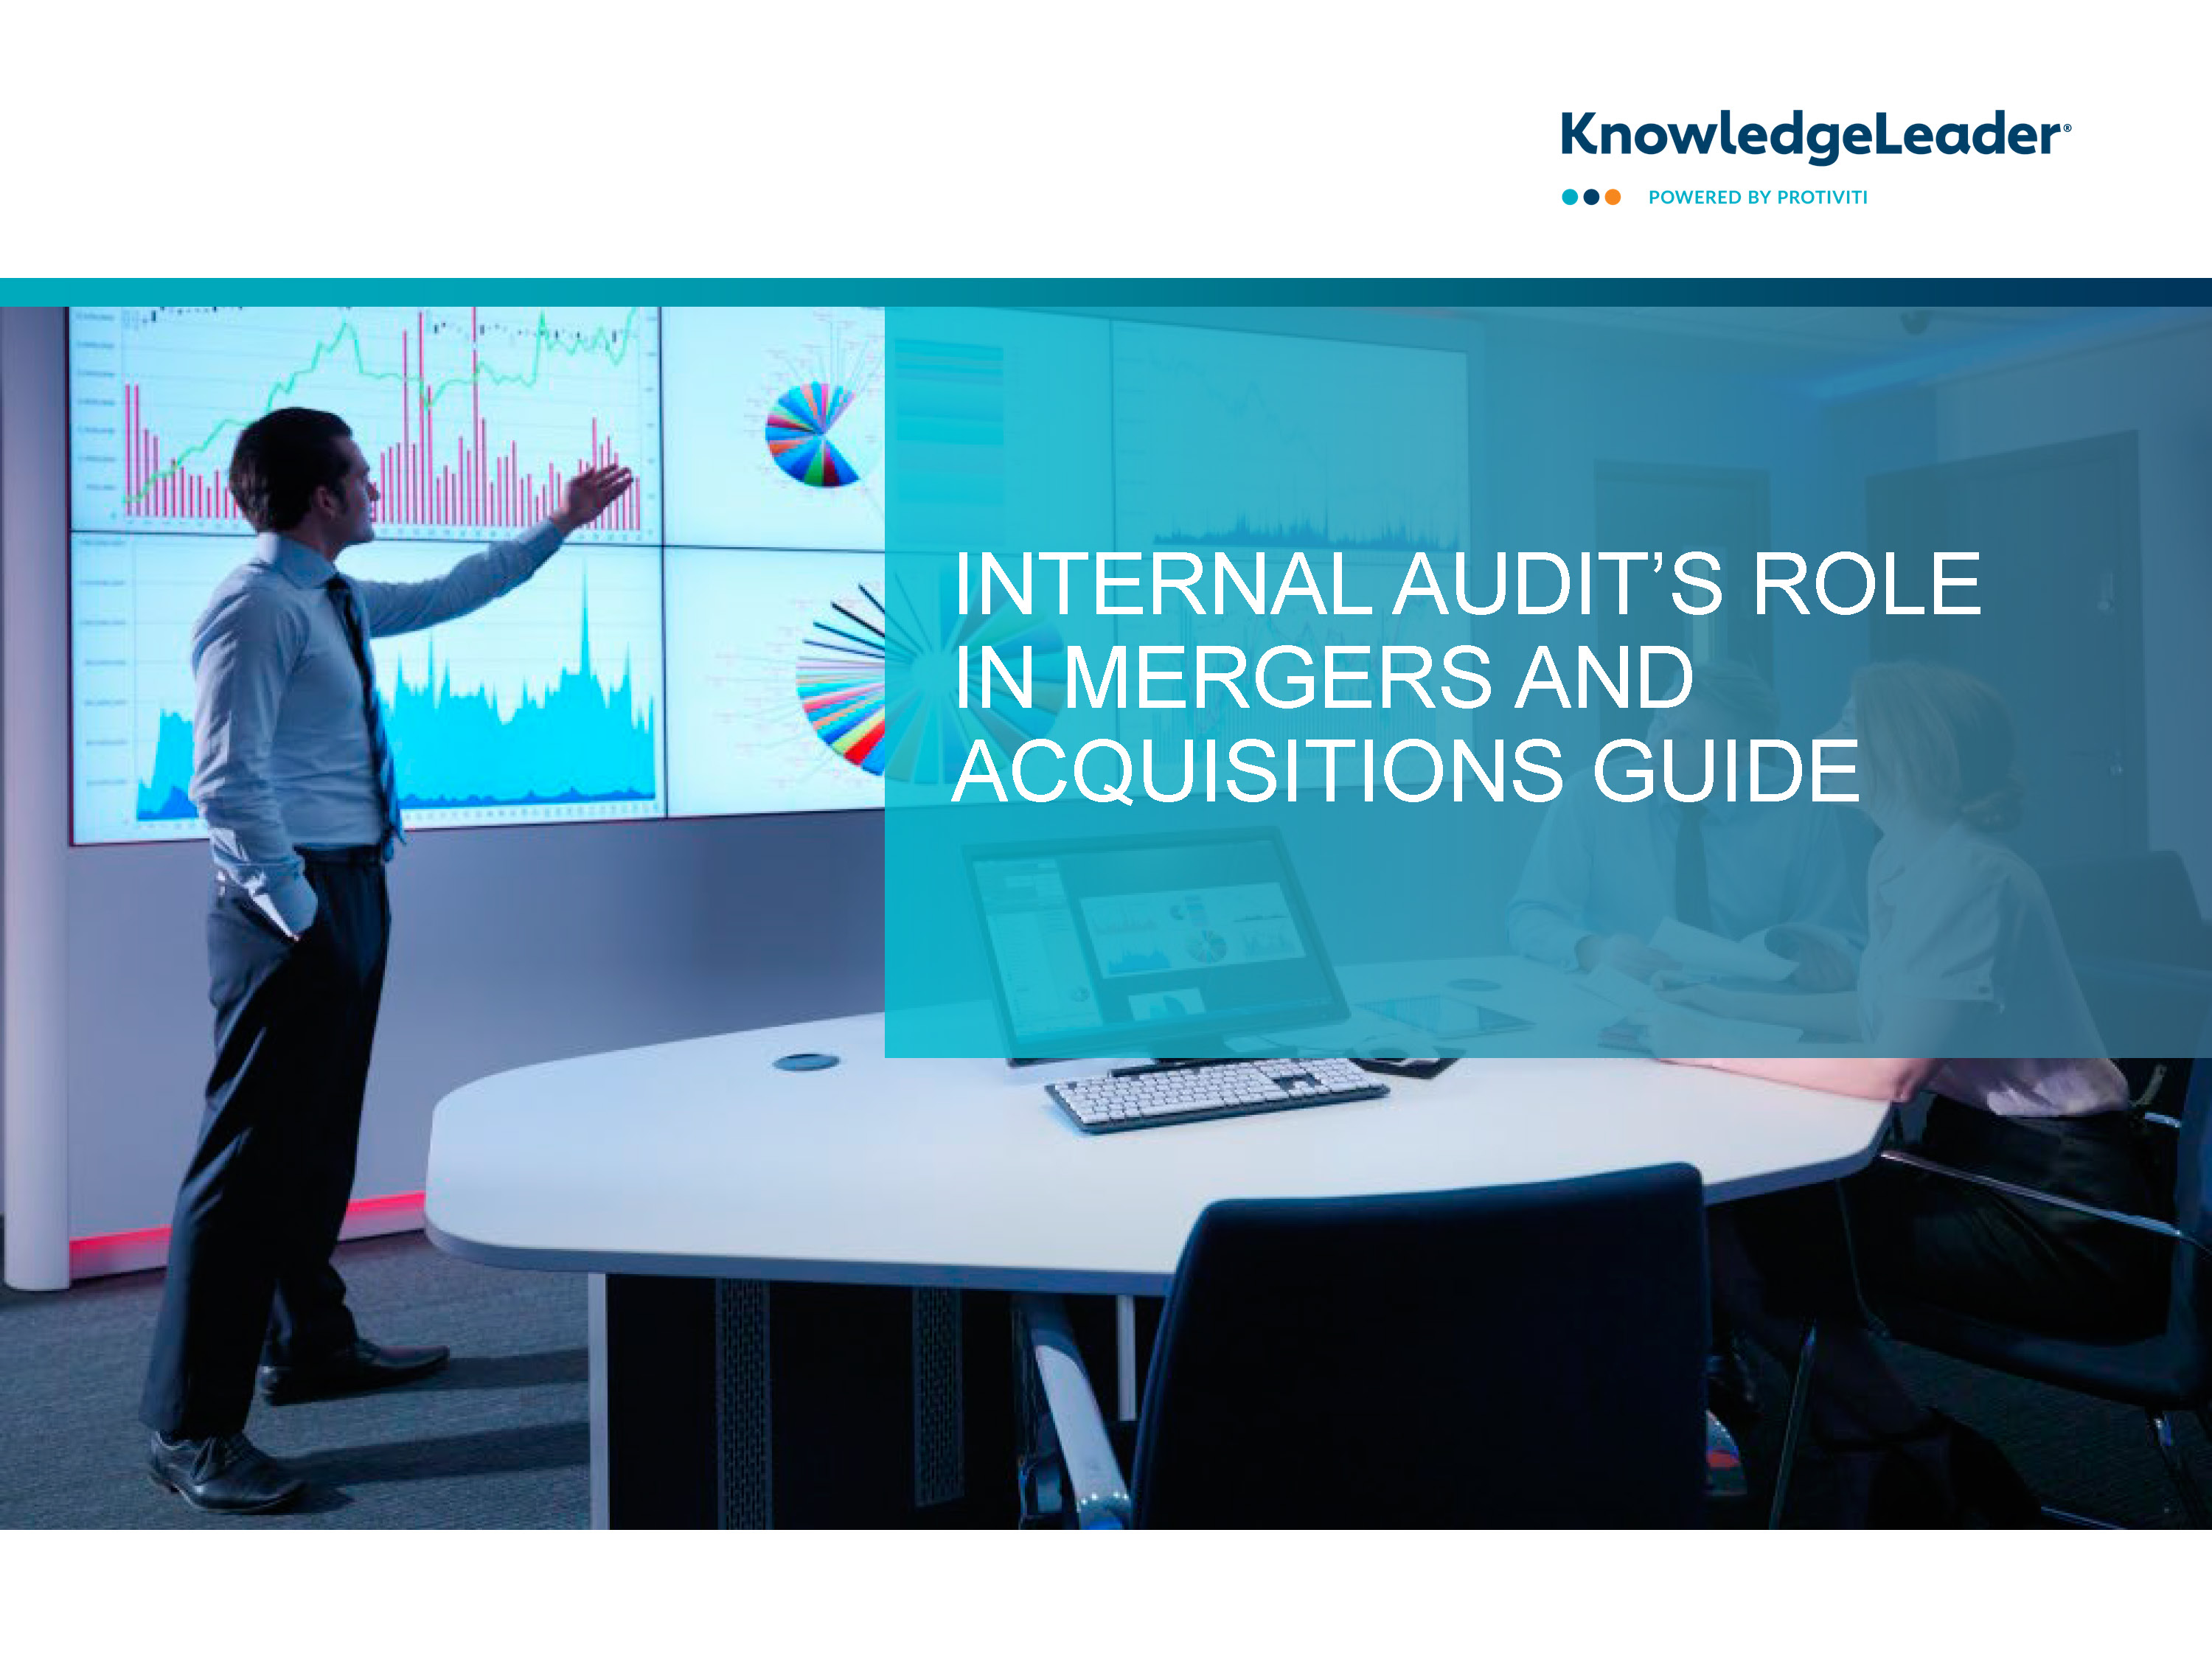 Screenshot of the first page of Internal Audit's Role in Mergers and Acquisitions Guide